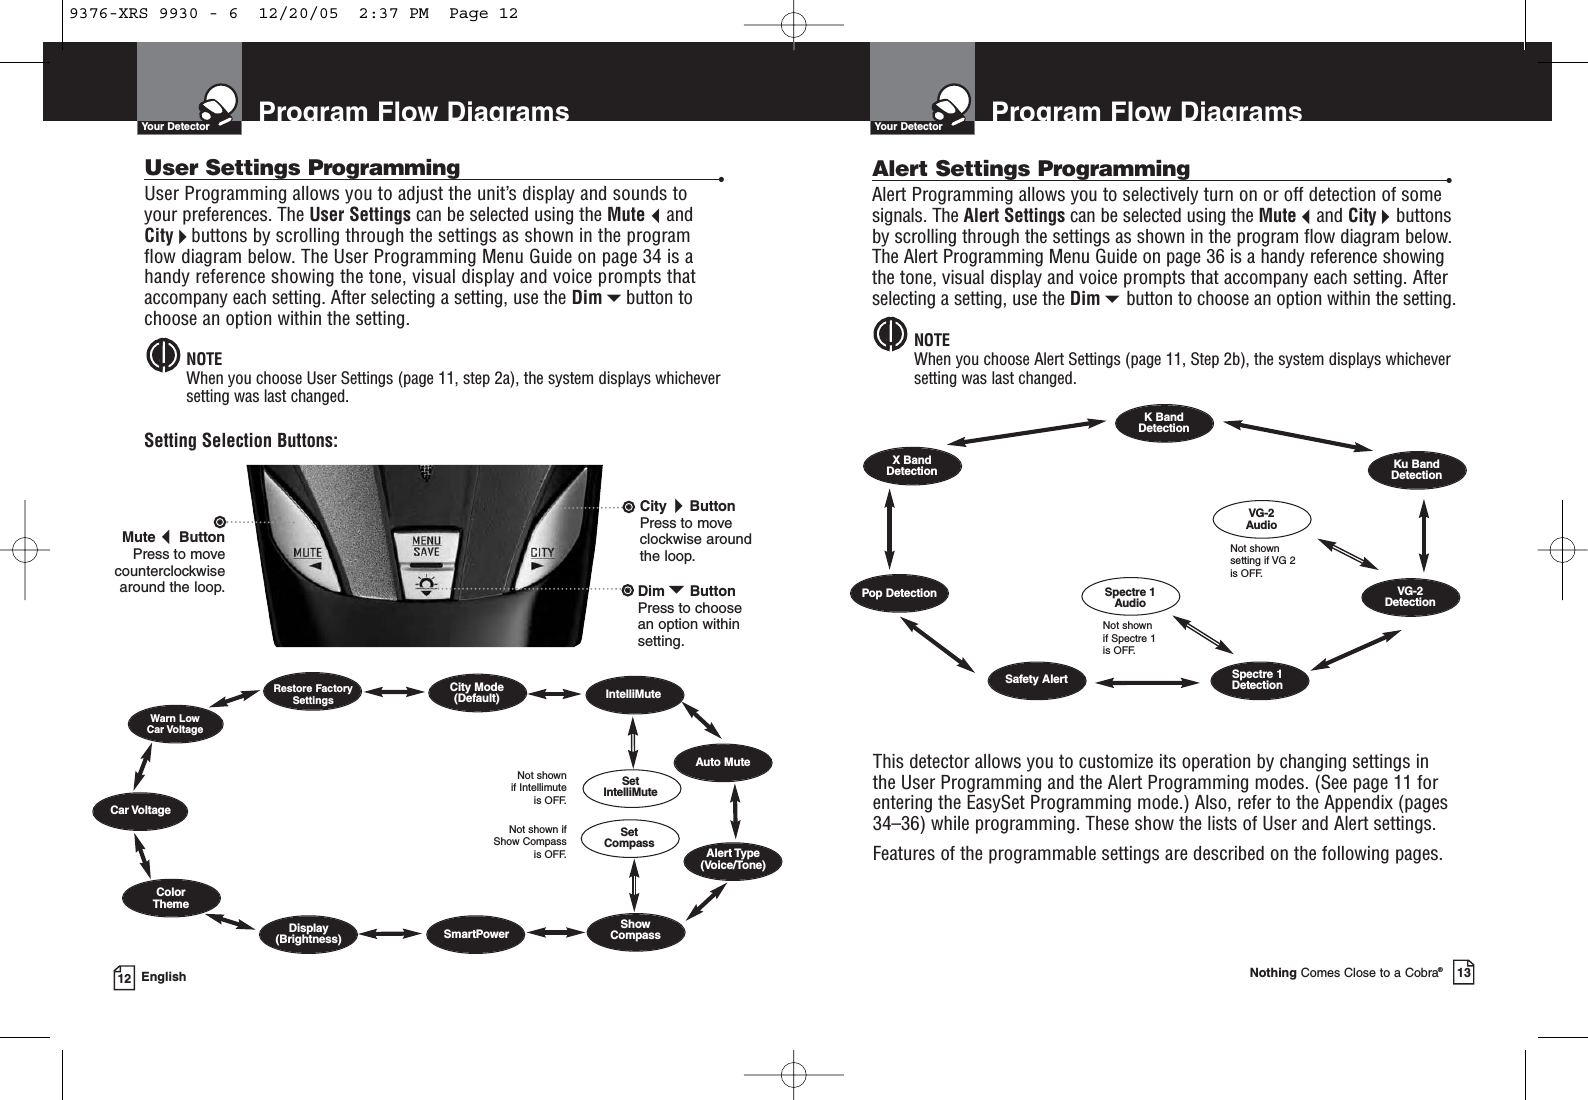 Program Flow DiagramsYour DetectorNothing Comes Close to a Cobra®13Program Flow DiagramsYour Detector12 EnglishUser Settings Programming •User Programming allows you to adjust the unit’s display and sounds to your preferences. The User Settings can be selected using the MuteandCitybuttons by scrolling through the settings as shown in the program flow diagram below. The User Programming Menu Guide on page 34 is ahandy reference showing the tone, visual display and voice prompts thataccompany each setting. After selecting a setting, use the Dimbutton tochoose an option within the setting.NOTEWhen you choose User Settings (page 11, step 2a), the system displays whicheversetting was last changed.Warn Low Car Voltage Restore FactorySettingsCar VoltageColorThemeDisplay(Brightness)City Mode(Default) IntelliMuteSmartPower Show CompassSet CompassSetIntelliMuteAuto MuteAlert Type(Voice/Tone)Not shown if Intellimute is OFF.Not shown if Show Compass is OFF.MuteButtonPress to movecounterclockwisearound the loop.CityButtonPress to moveclockwise aroundthe loop.Setting Selection Buttons:DimButtonPress to choose an option withinsetting.Alert Settings Programming  •Alert Programming allows you to selectively turn on or off detection of somesignals. The Alert Settings can be selected using the Muteand Citybuttonsby scrolling through the settings as shown in the program flow diagram below.The Alert Programming Menu Guide on page 36 is a handy reference showingthe tone, visual display and voice prompts that accompany each setting. Afterselecting a setting, use the Dimbutton to choose an option within the setting.NOTEWhen you choose Alert Settings (page 11, Step 2b), the system displays whicheversetting was last changed.Not shownsetting if VG 2is OFF.Not shown if Spectre 1 is OFF.Pop DetectionX Band Detection Ku BandDetectionVG-2DetectionSpectre 1DetectionSafety AlertSpectre 1 AudioVG-2 AudioThis detector allows you to customize its operation by changing settings inthe User Programming and the Alert Programming modes. (See page 11 forentering the EasySet Programming mode.) Also, refer to the Appendix (pages34–36) while programming. These show the lists of User and Alert settings.Features of the programmable settings are described on the following pages.K BandDetection9376-XRS 9930 - 6  12/20/05  2:37 PM  Page 12